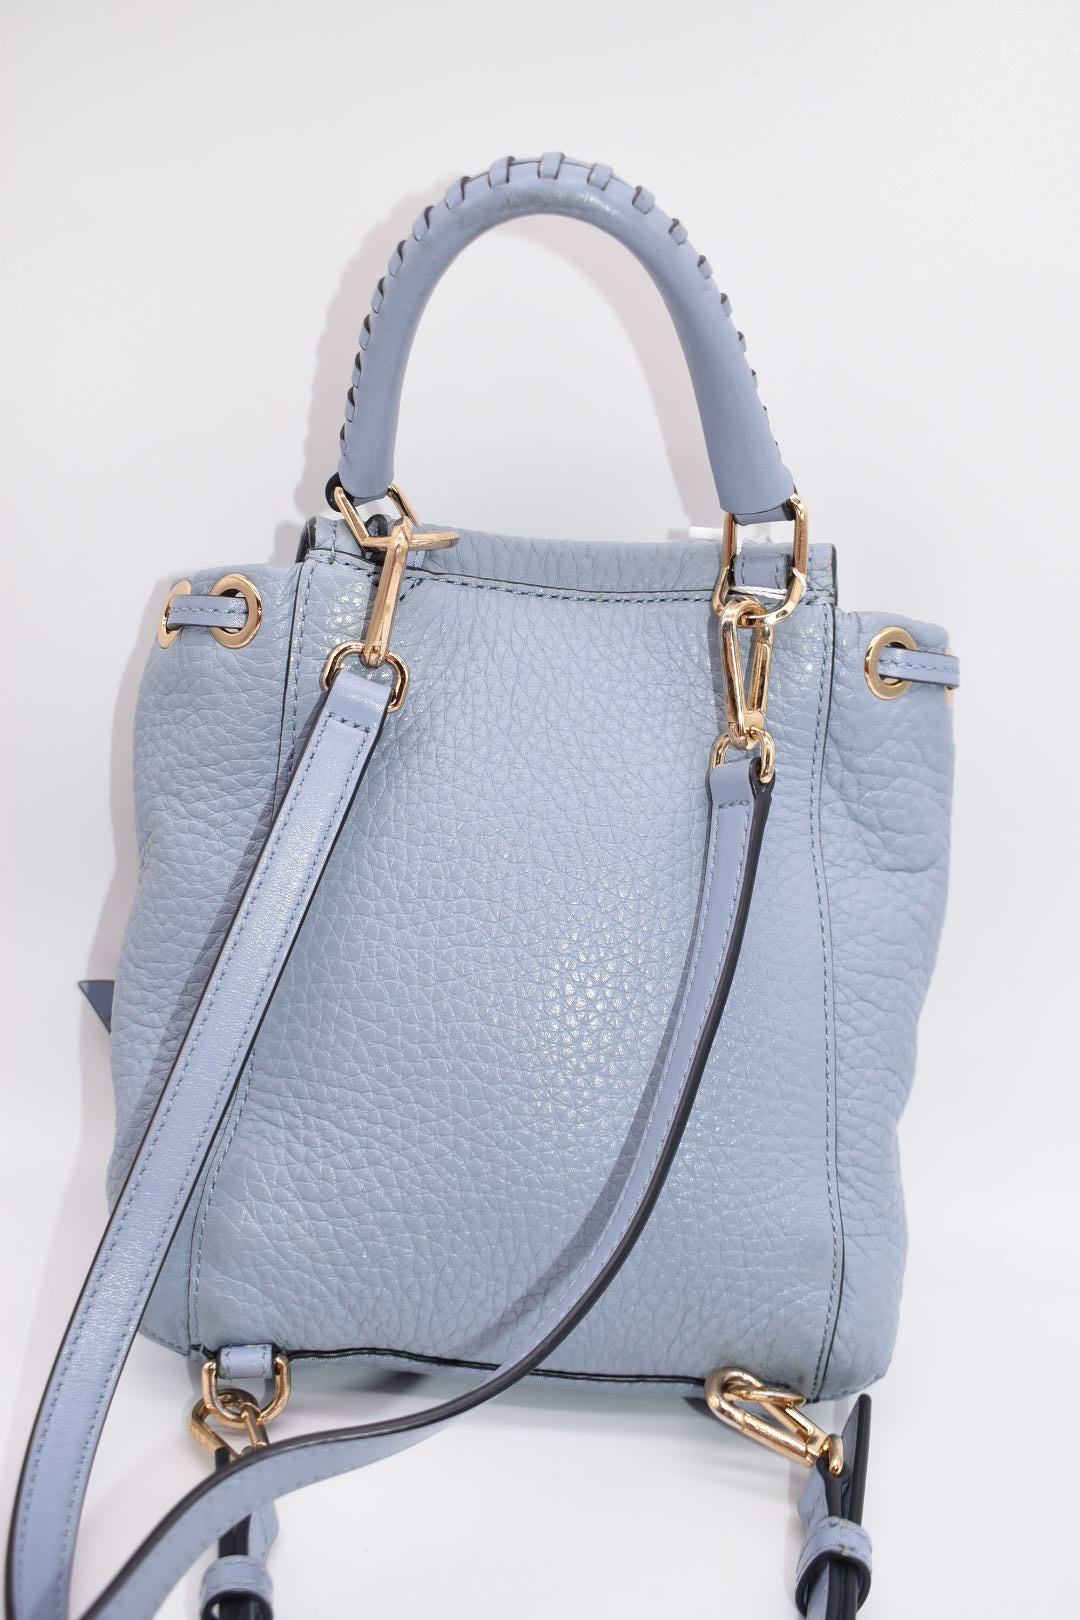 Michael Kors Viv Extra-Small Pebbled Leather Backpack in Baby Blue